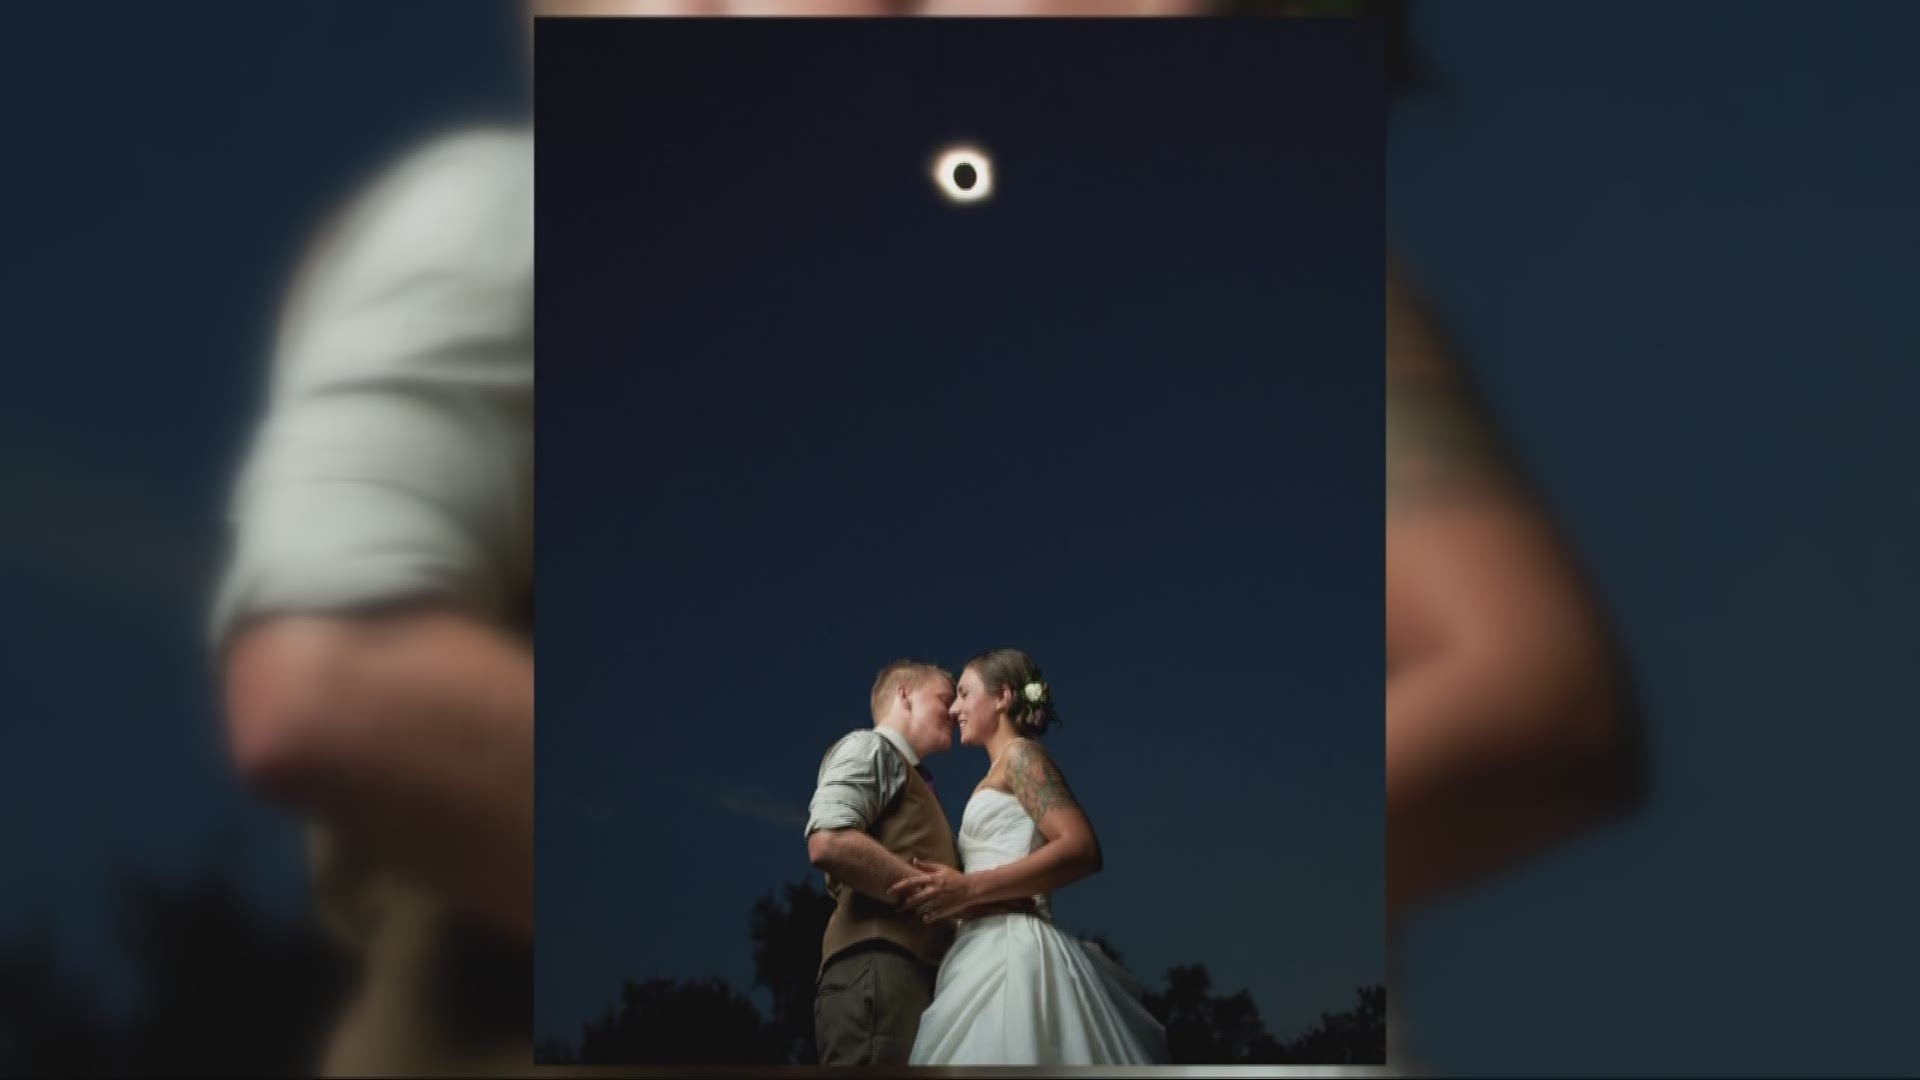 Two military service members were able to time their photo just right and get hitched under the great American eclipse.